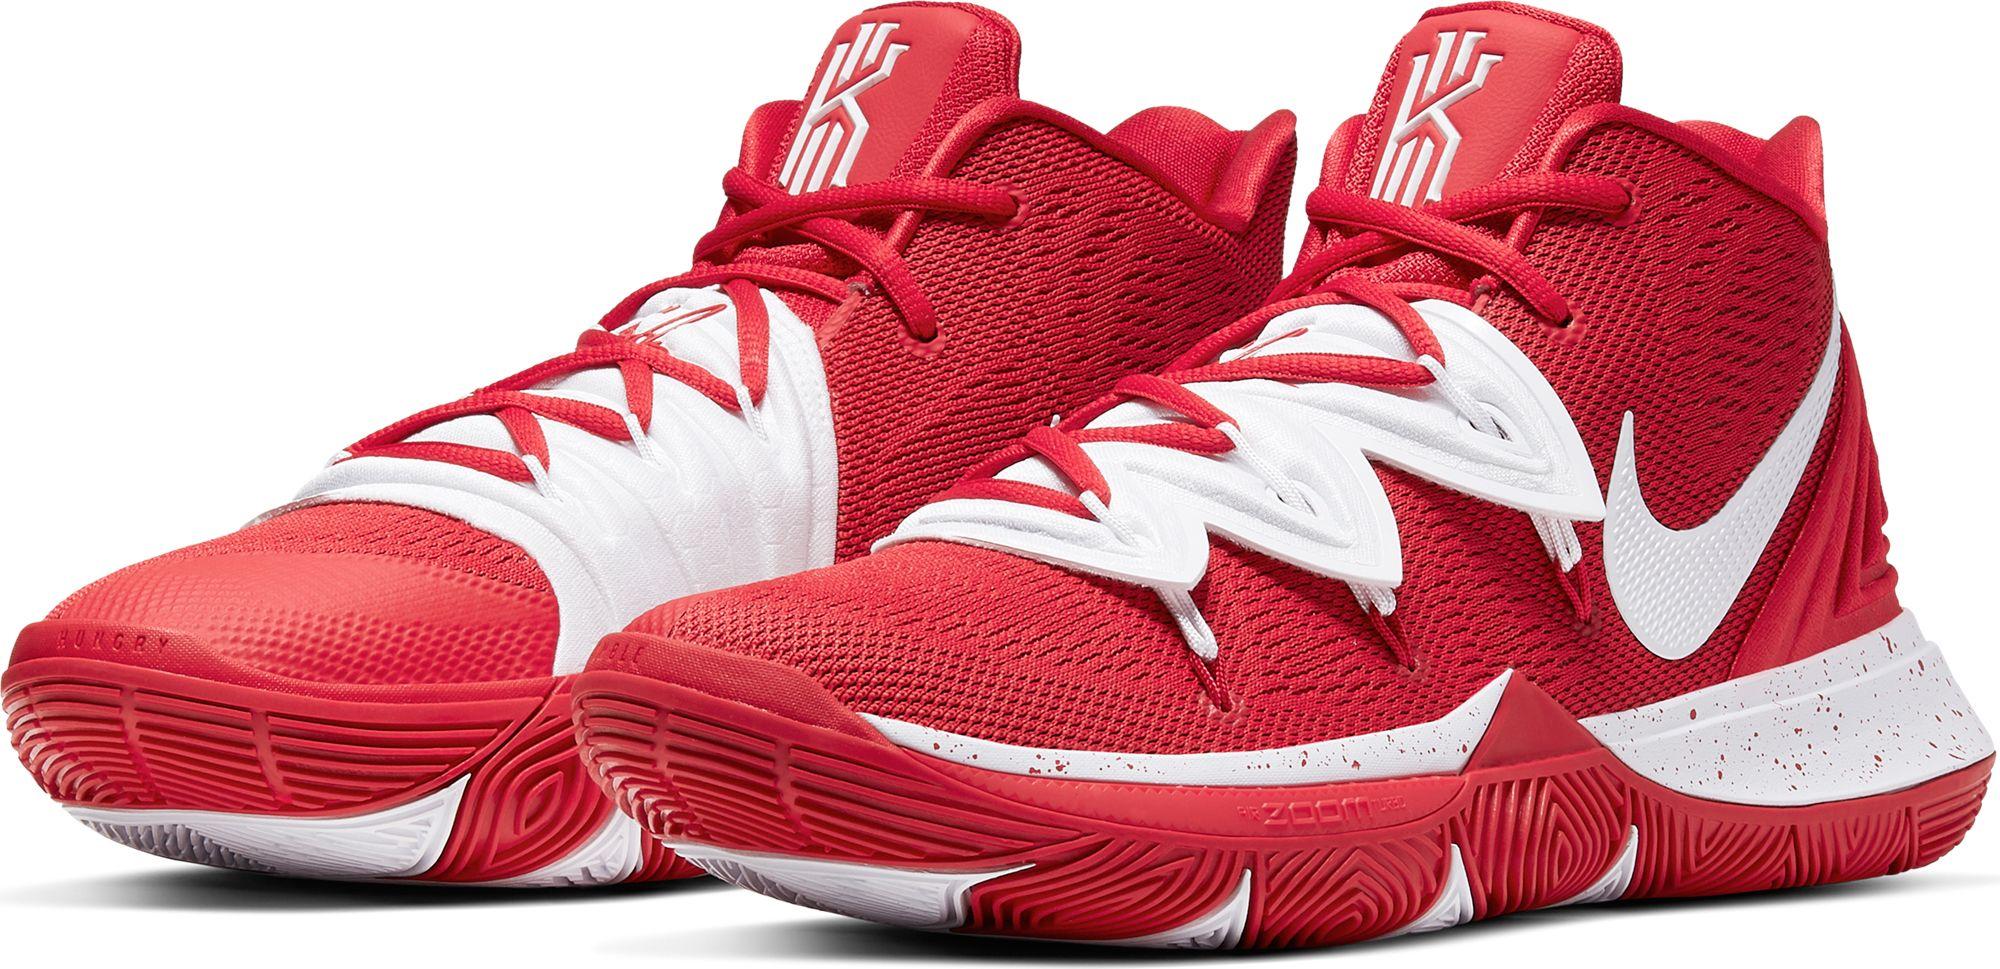 Nike Rubber Kyrie 5 Basketball Shoes in University Red